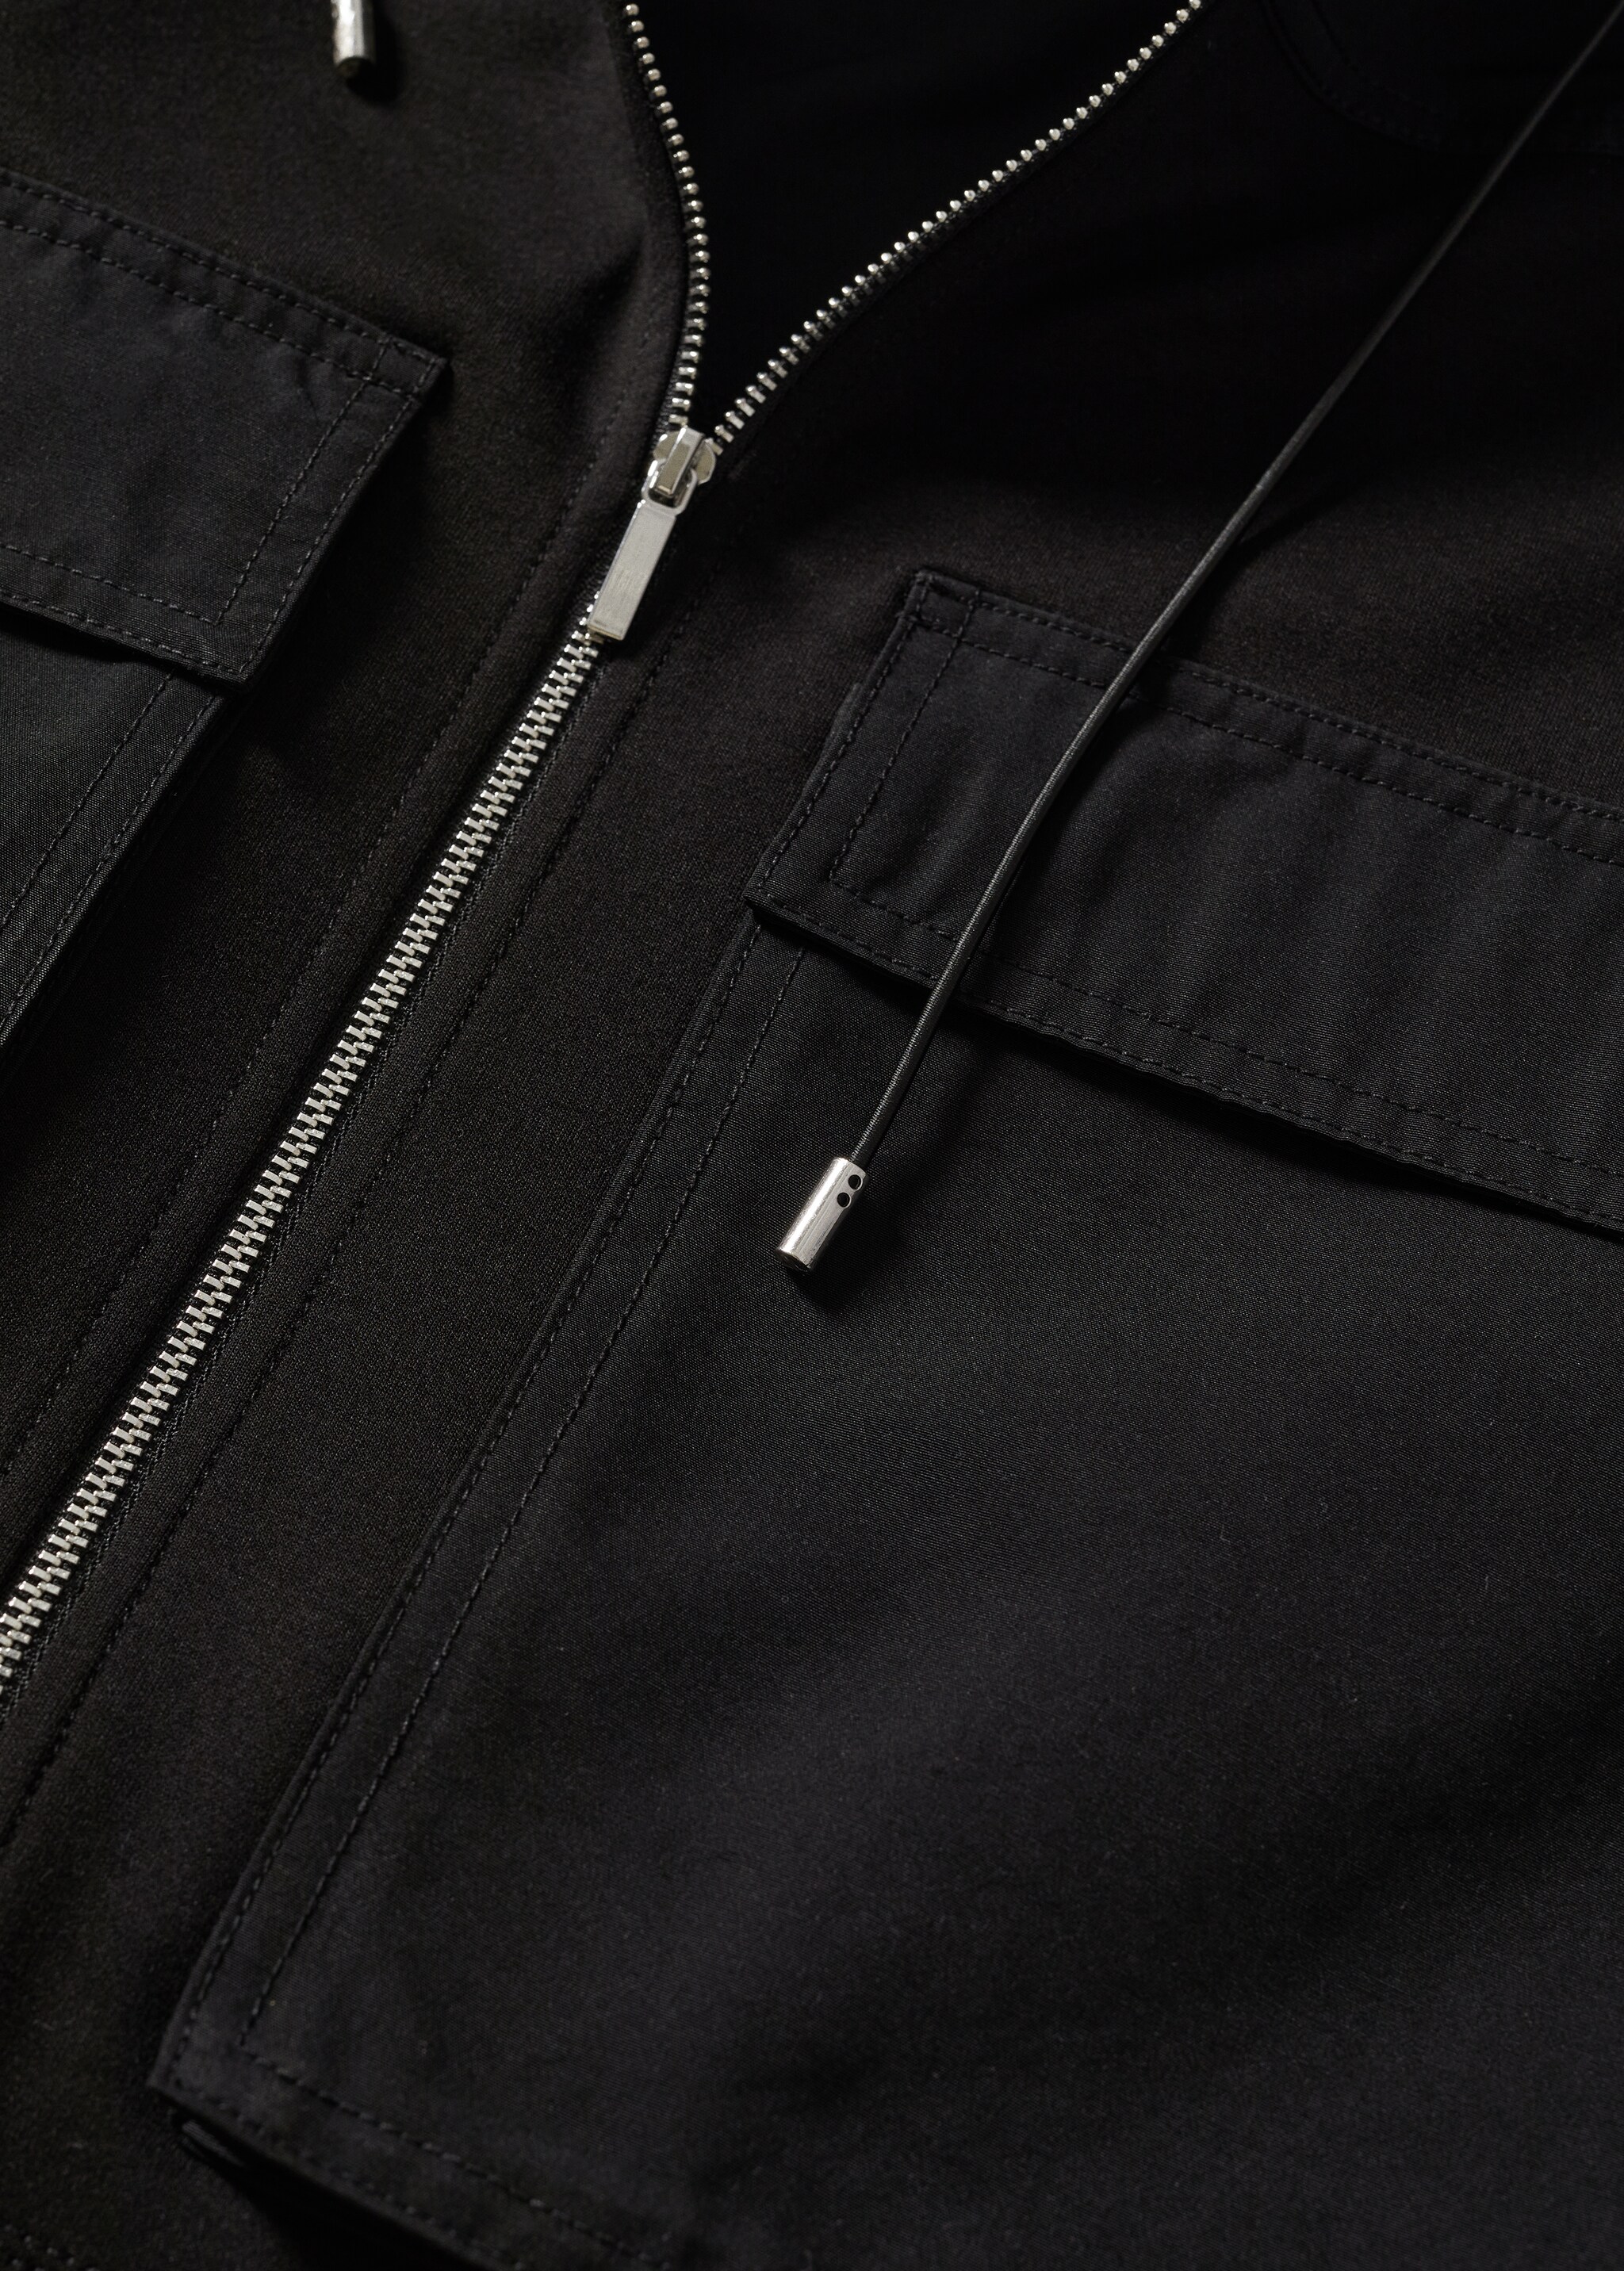 Oversized sweatshirt with pockets - Details of the article 8